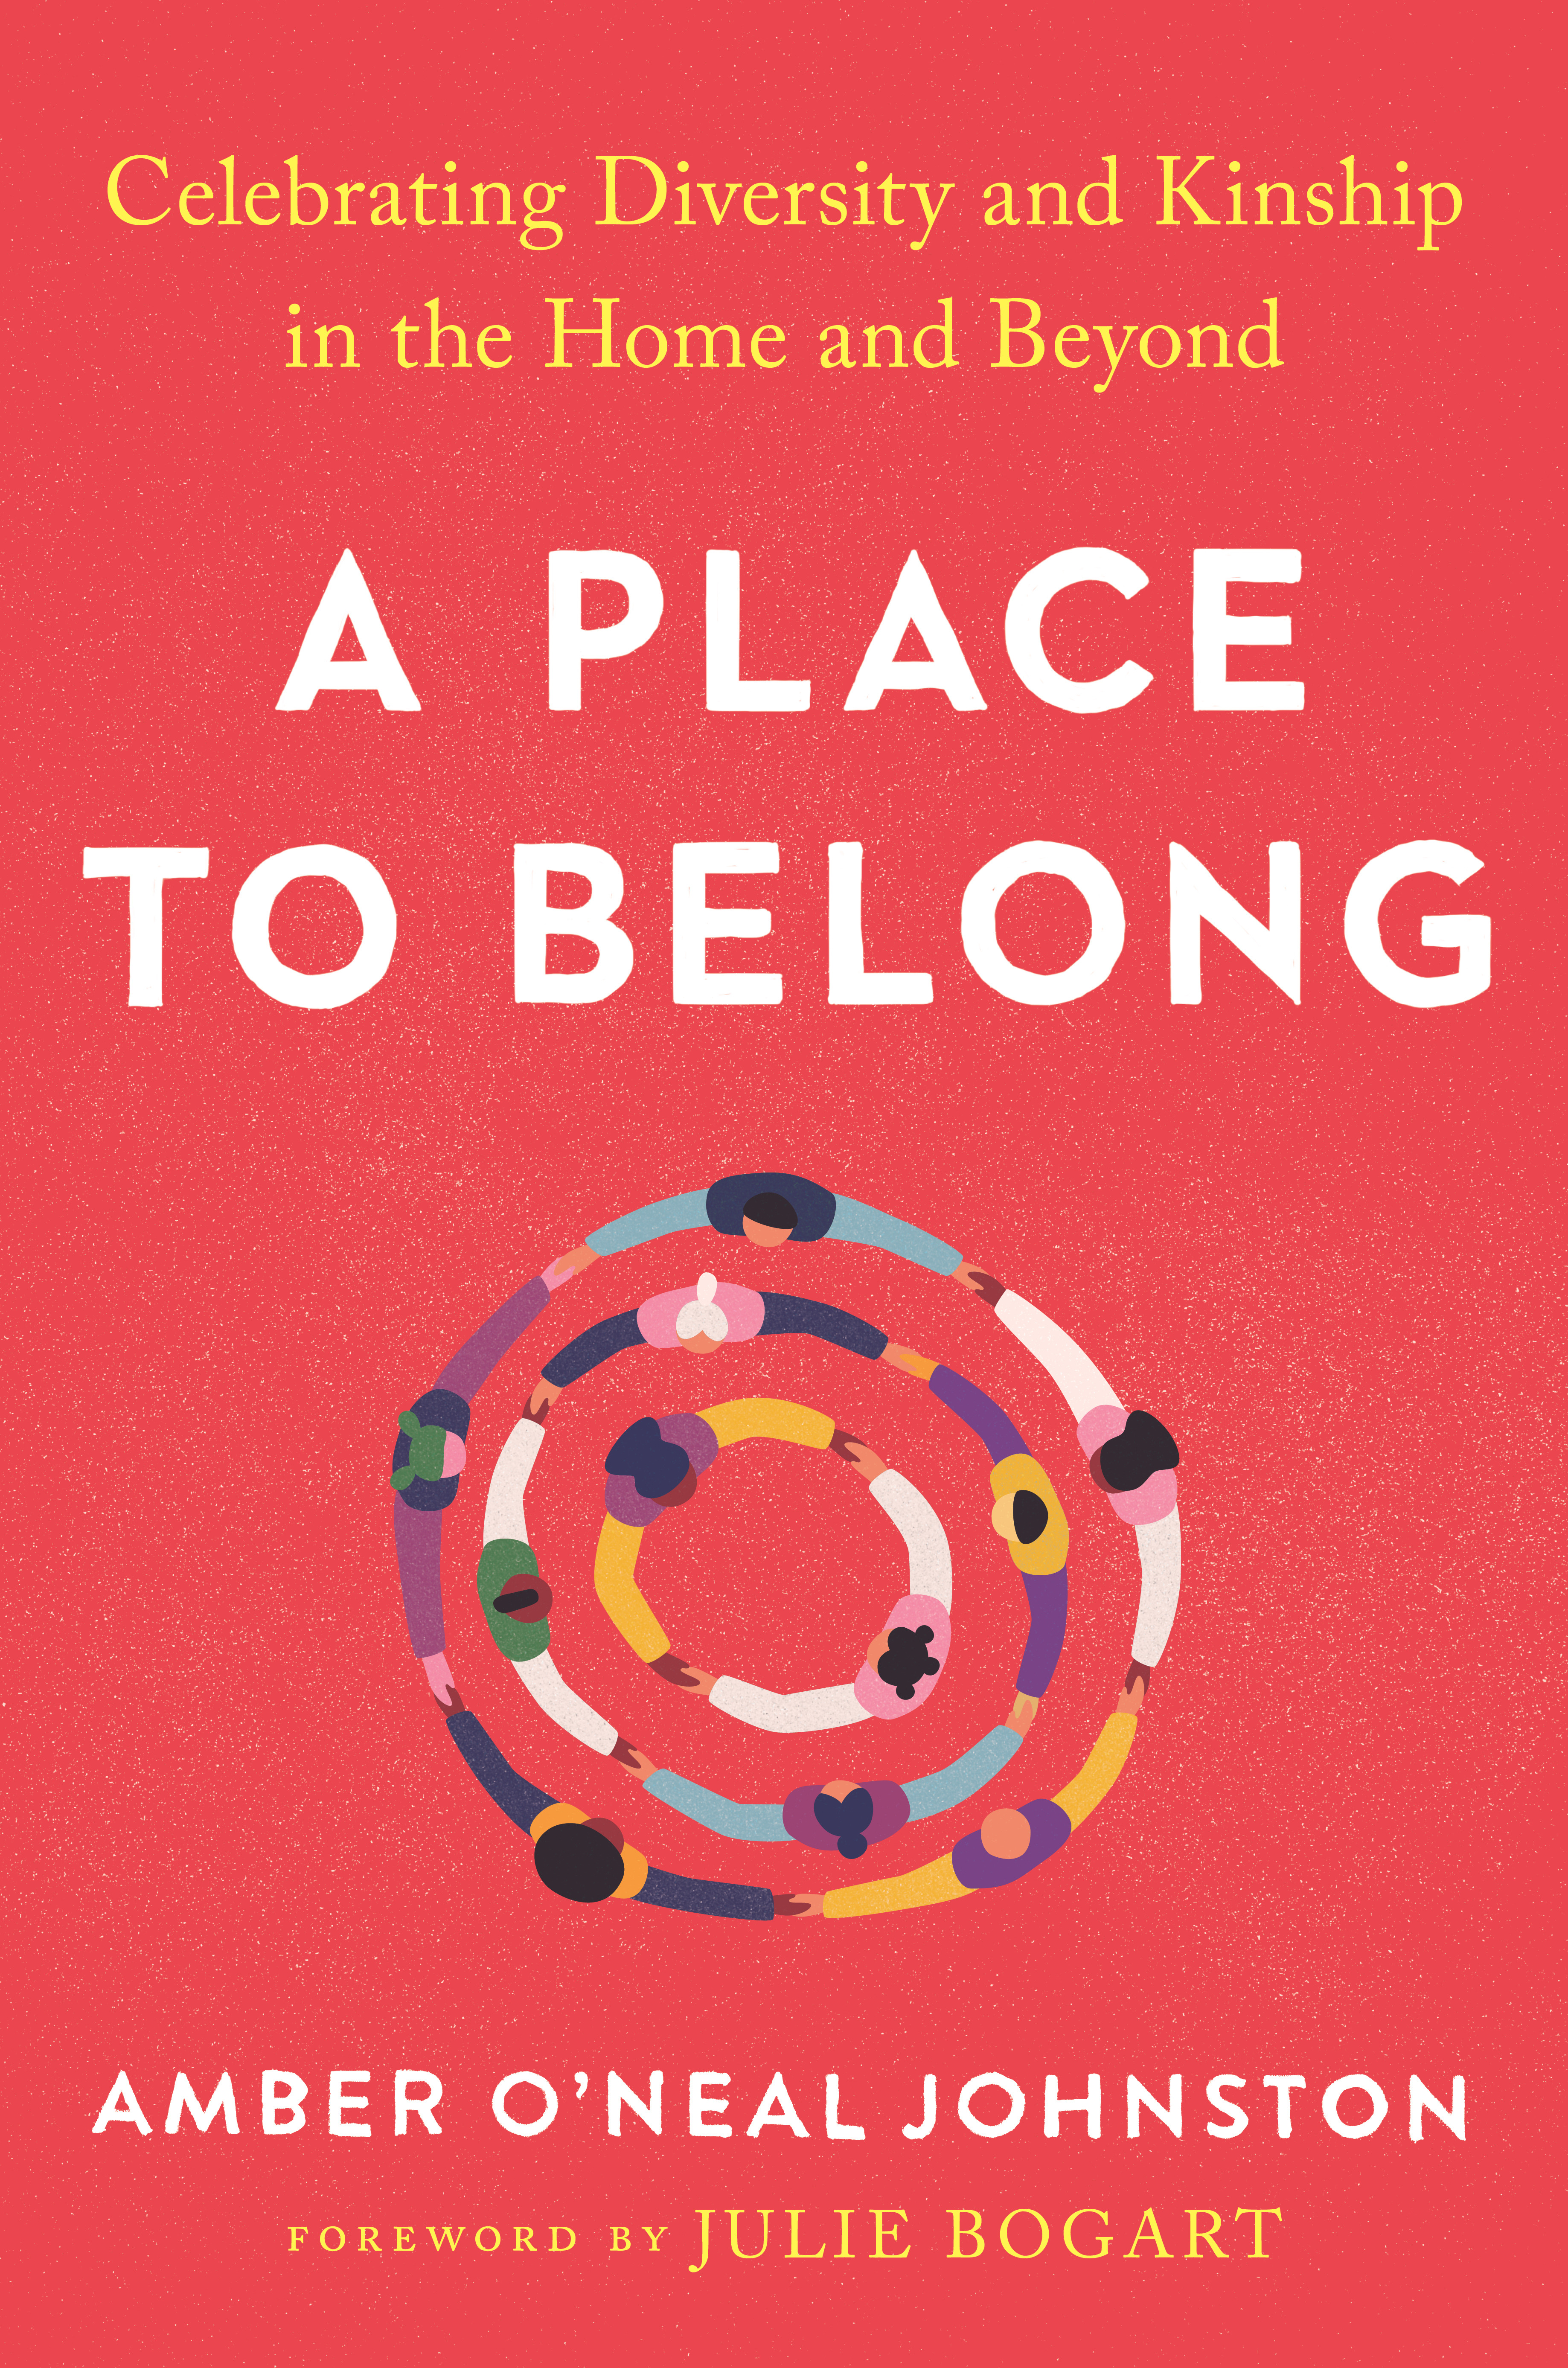 A Place to Belong : Celebrating Diversity and Kinship in the Home and Beyond | O'Neal Johnston, Amber